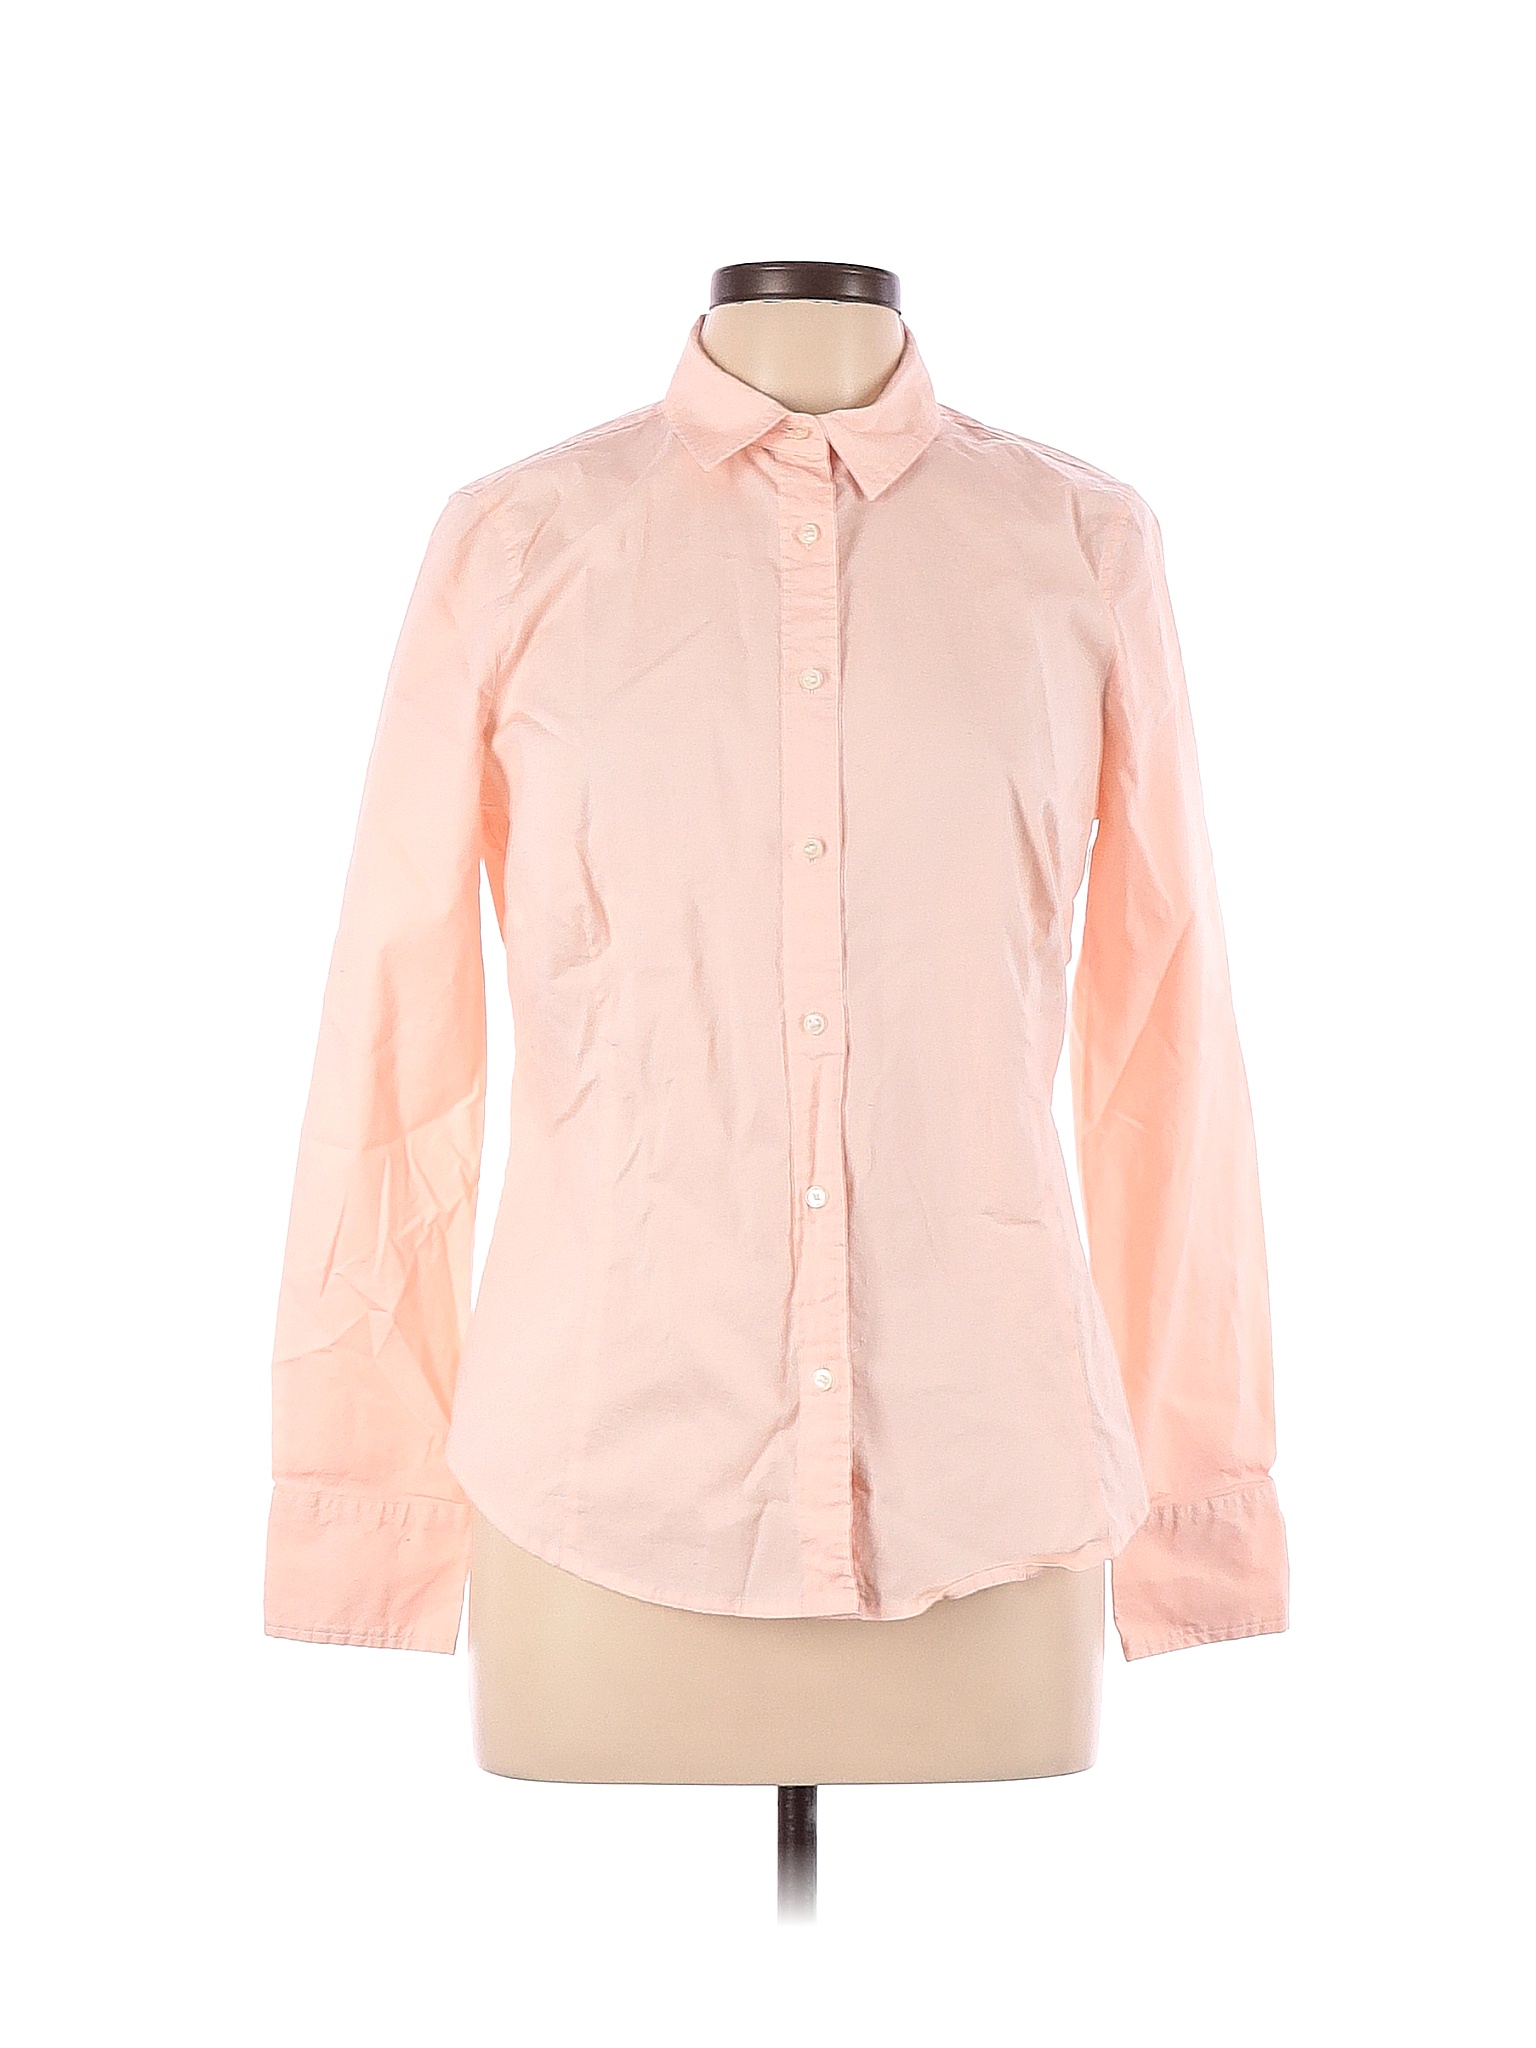 J.Crew 365 Solid Pink Long Sleeve Button-Down Shirt Size 10 - 72% off ...